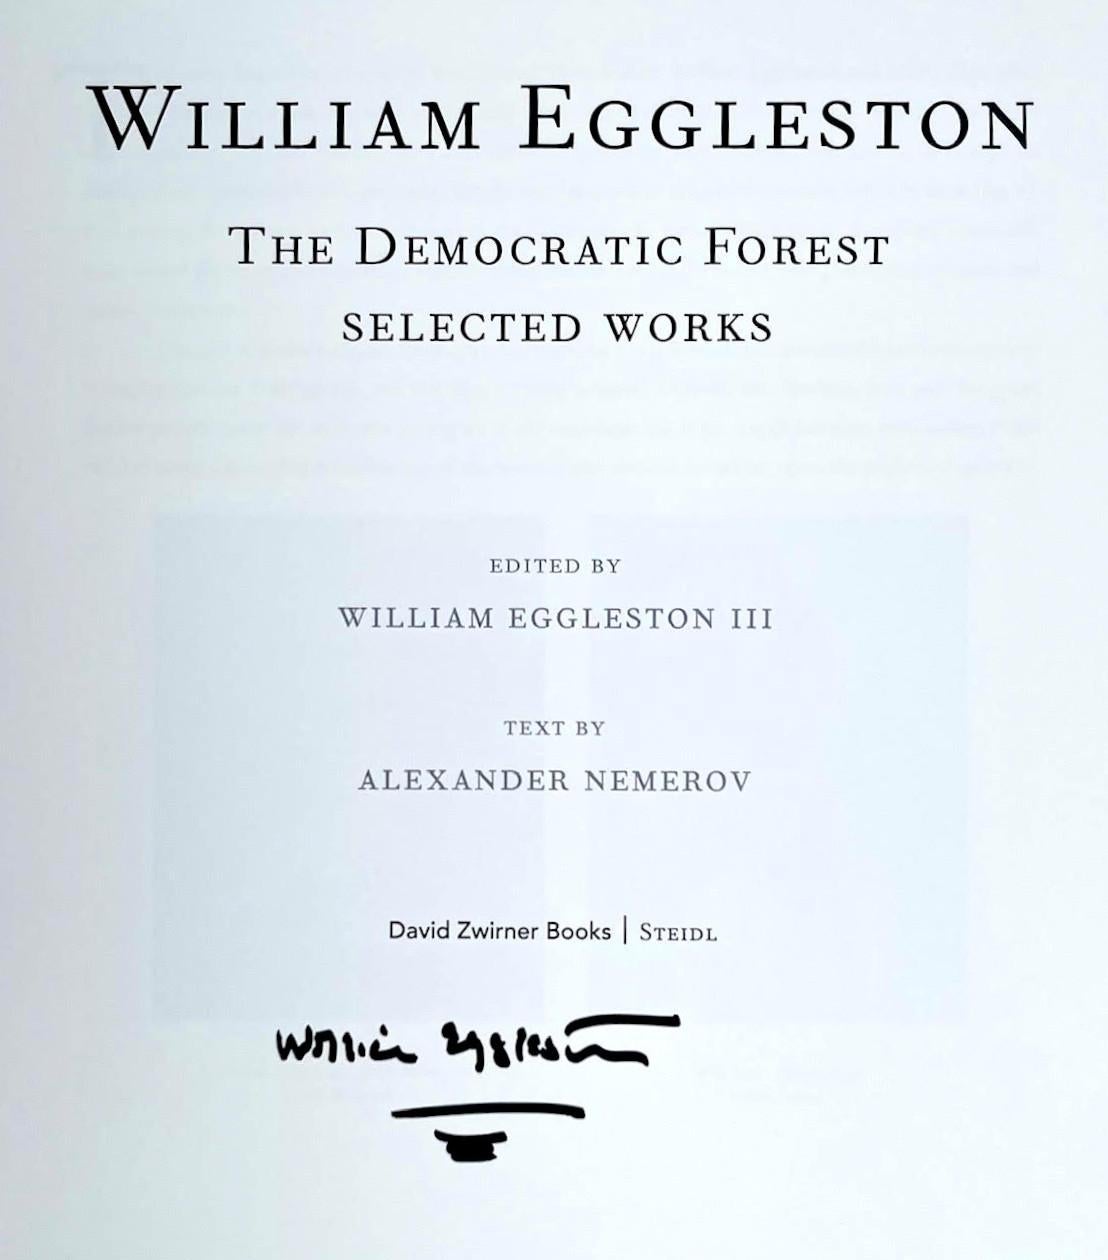 William Eggleston The Democratic Forest Selected Works (Hand signed) For Sale 4